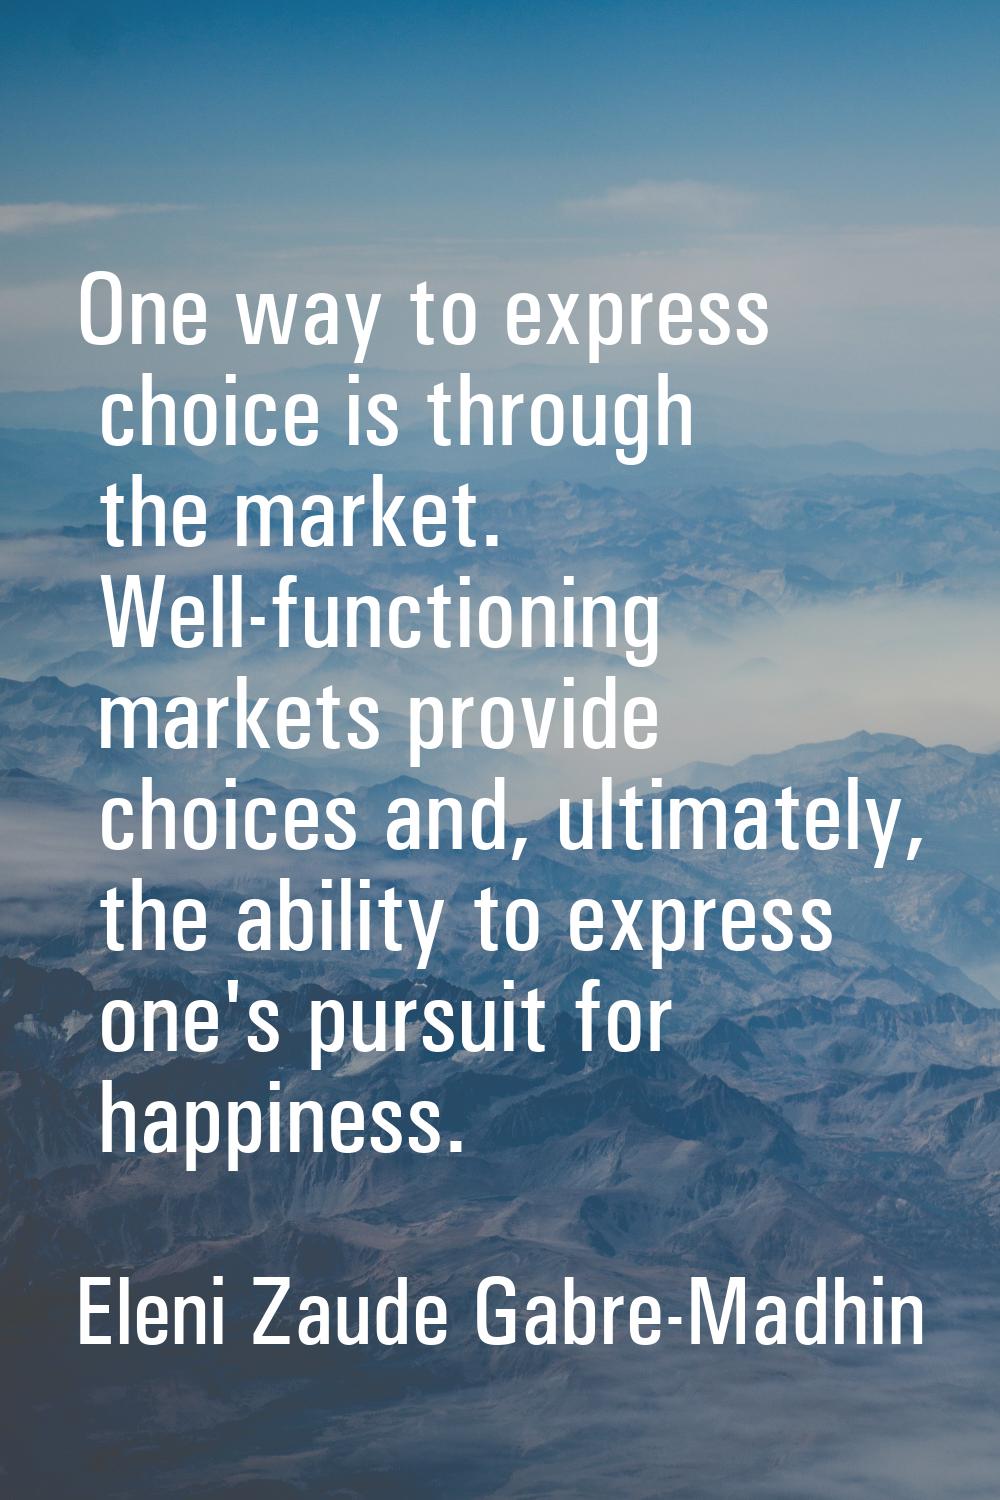 One way to express choice is through the market. Well-functioning markets provide choices and, ulti